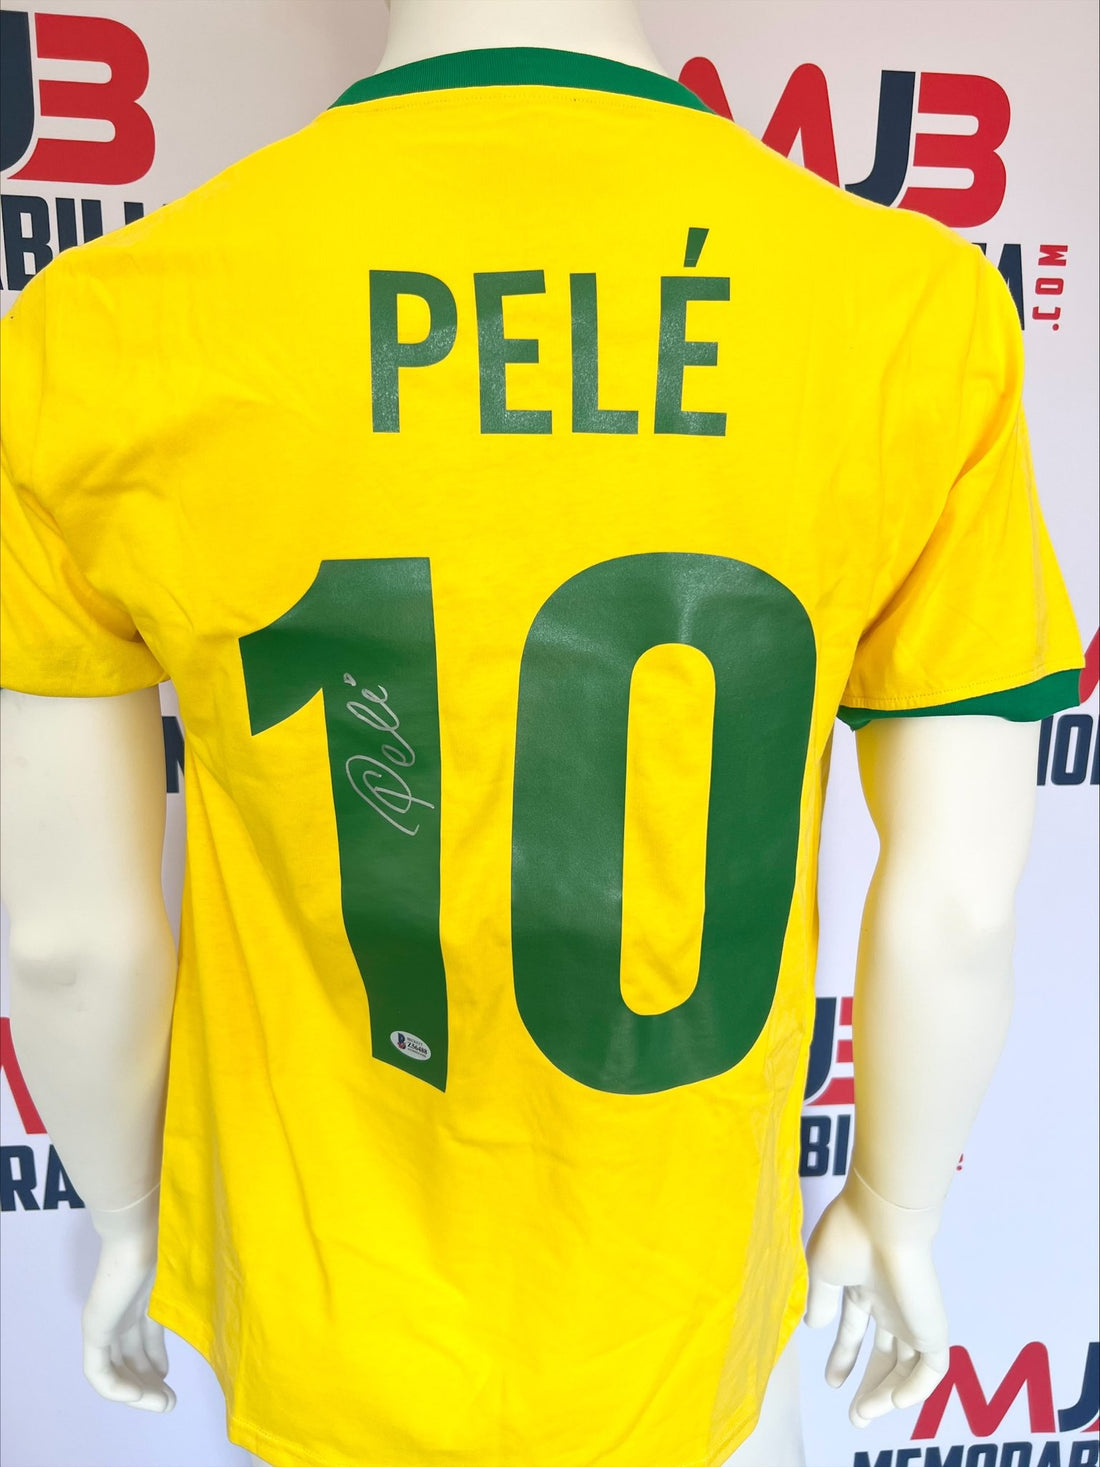 Making the Goal: A Die-hard Soccer Fan’s Journey to Owning a Signed Pele Jersey